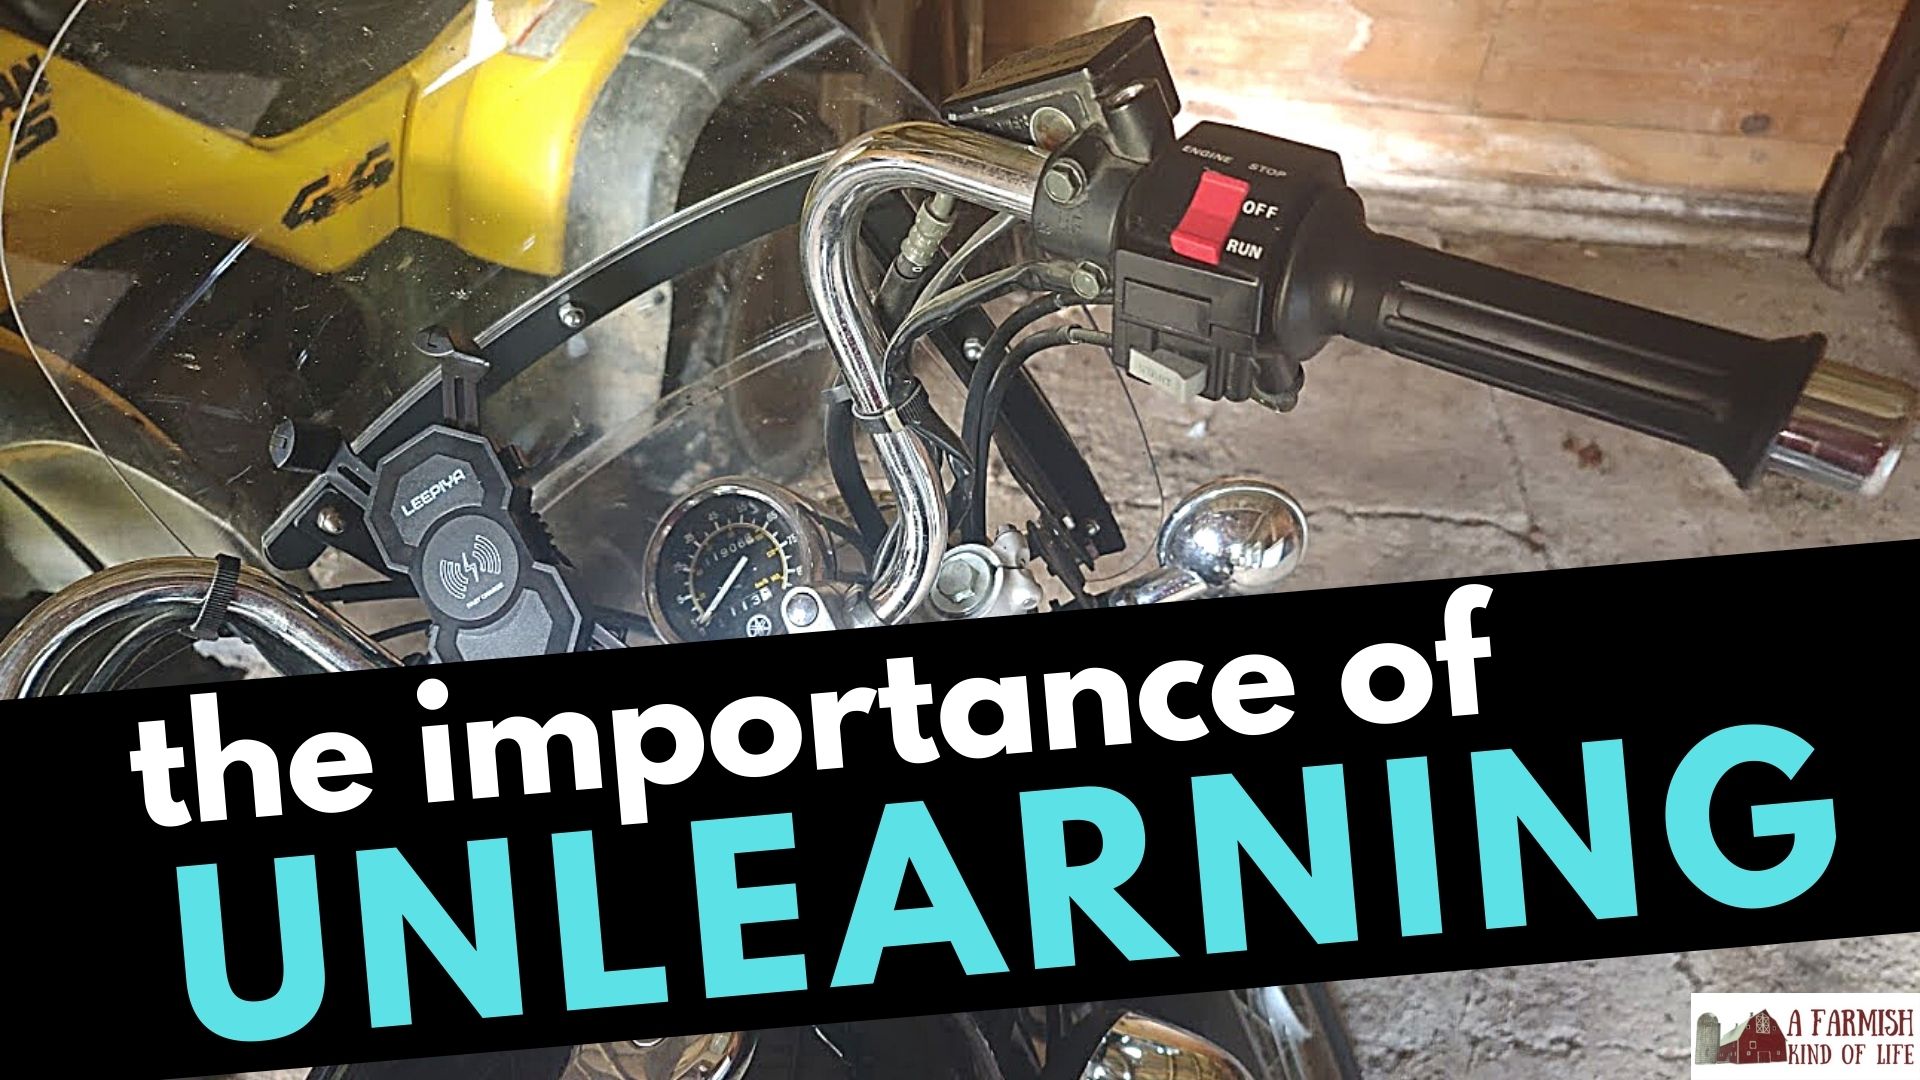 149: The Importance of Unlearning